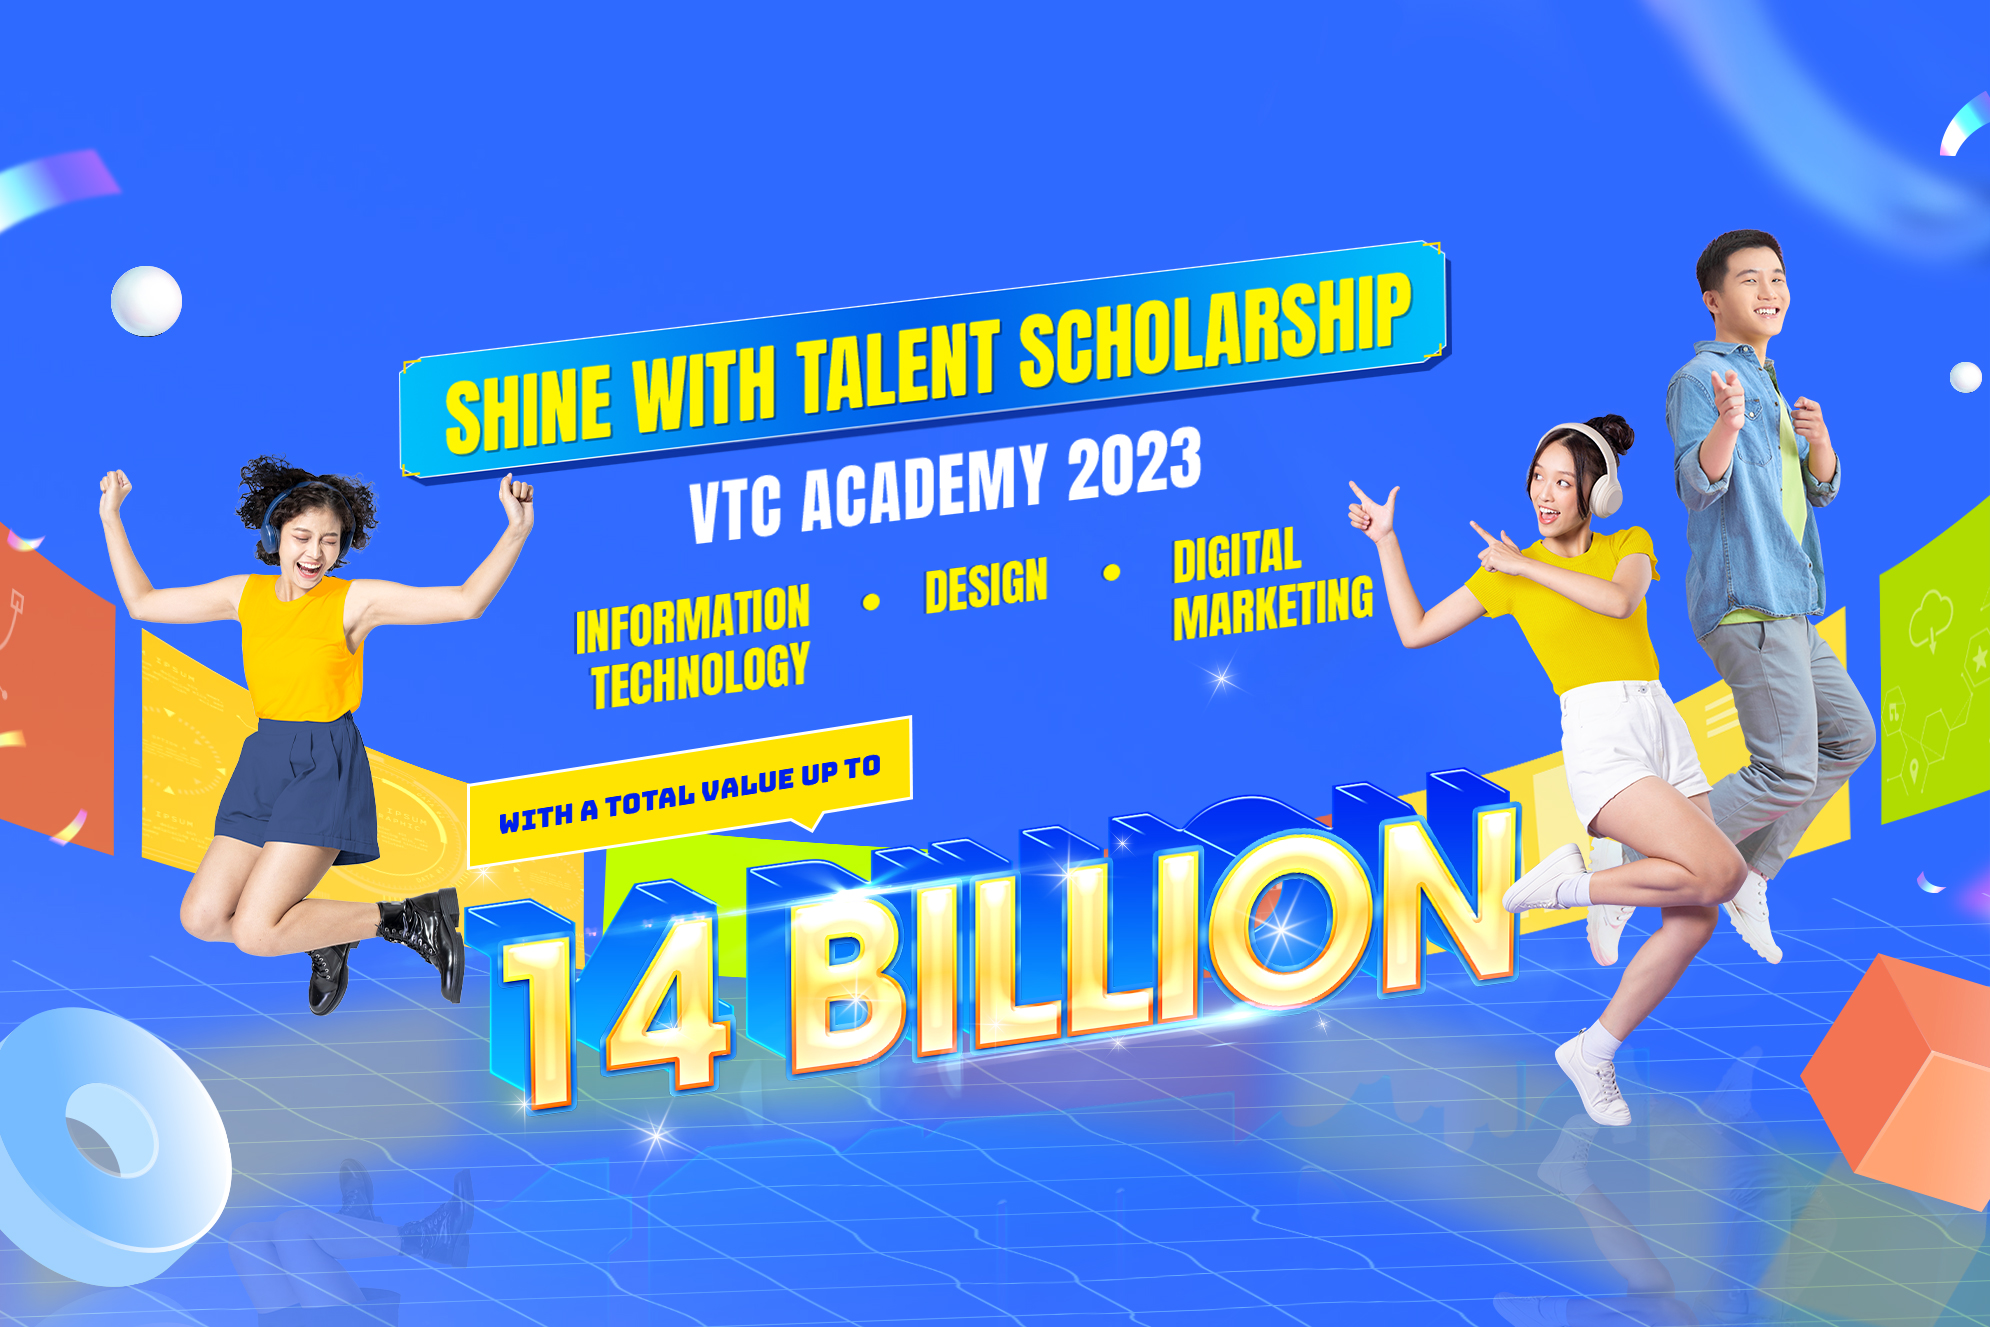 VTC Academy Talent Scholarship 2023: Over 414 scholarships worth up to 14 billion dong